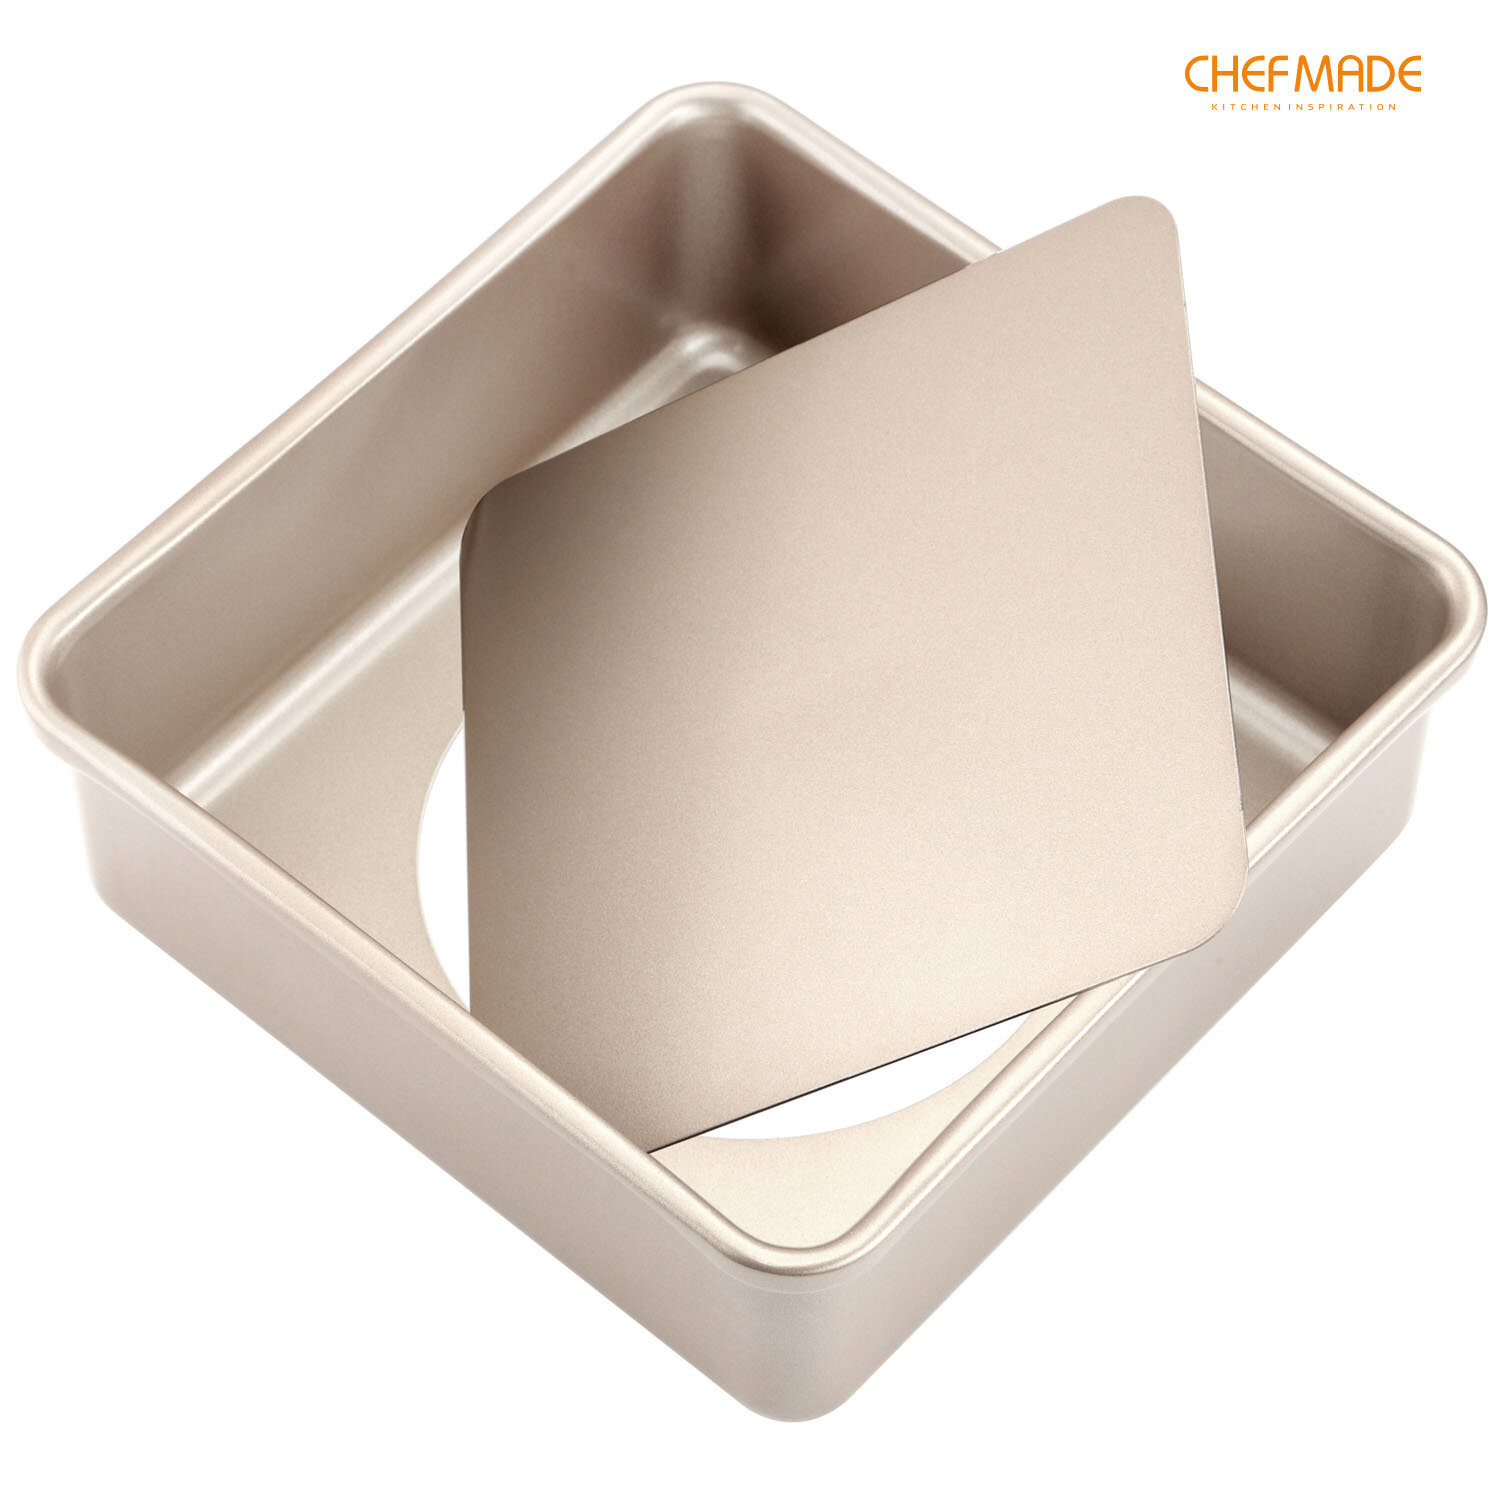 6 Pcs Durable Stainless Removable Bottom Cake Pan Non-Stick Baking Mold 